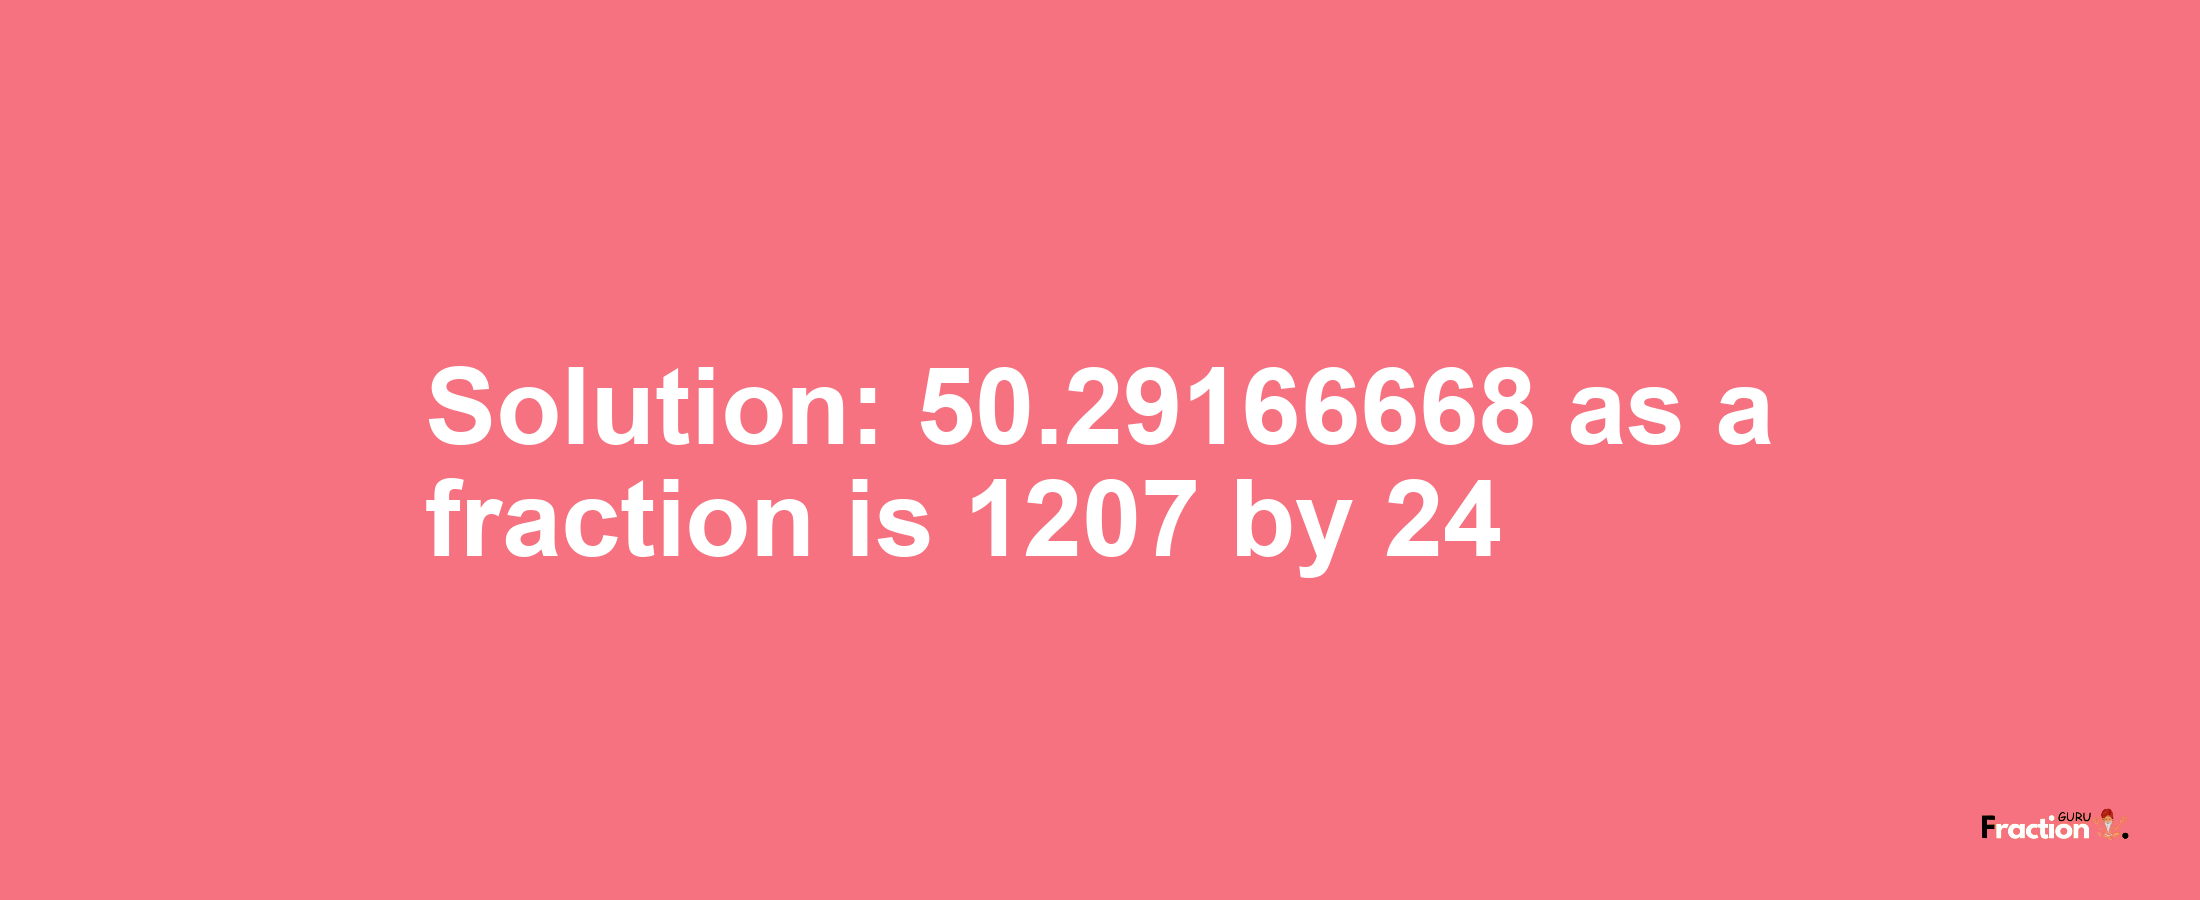 Solution:50.29166668 as a fraction is 1207/24